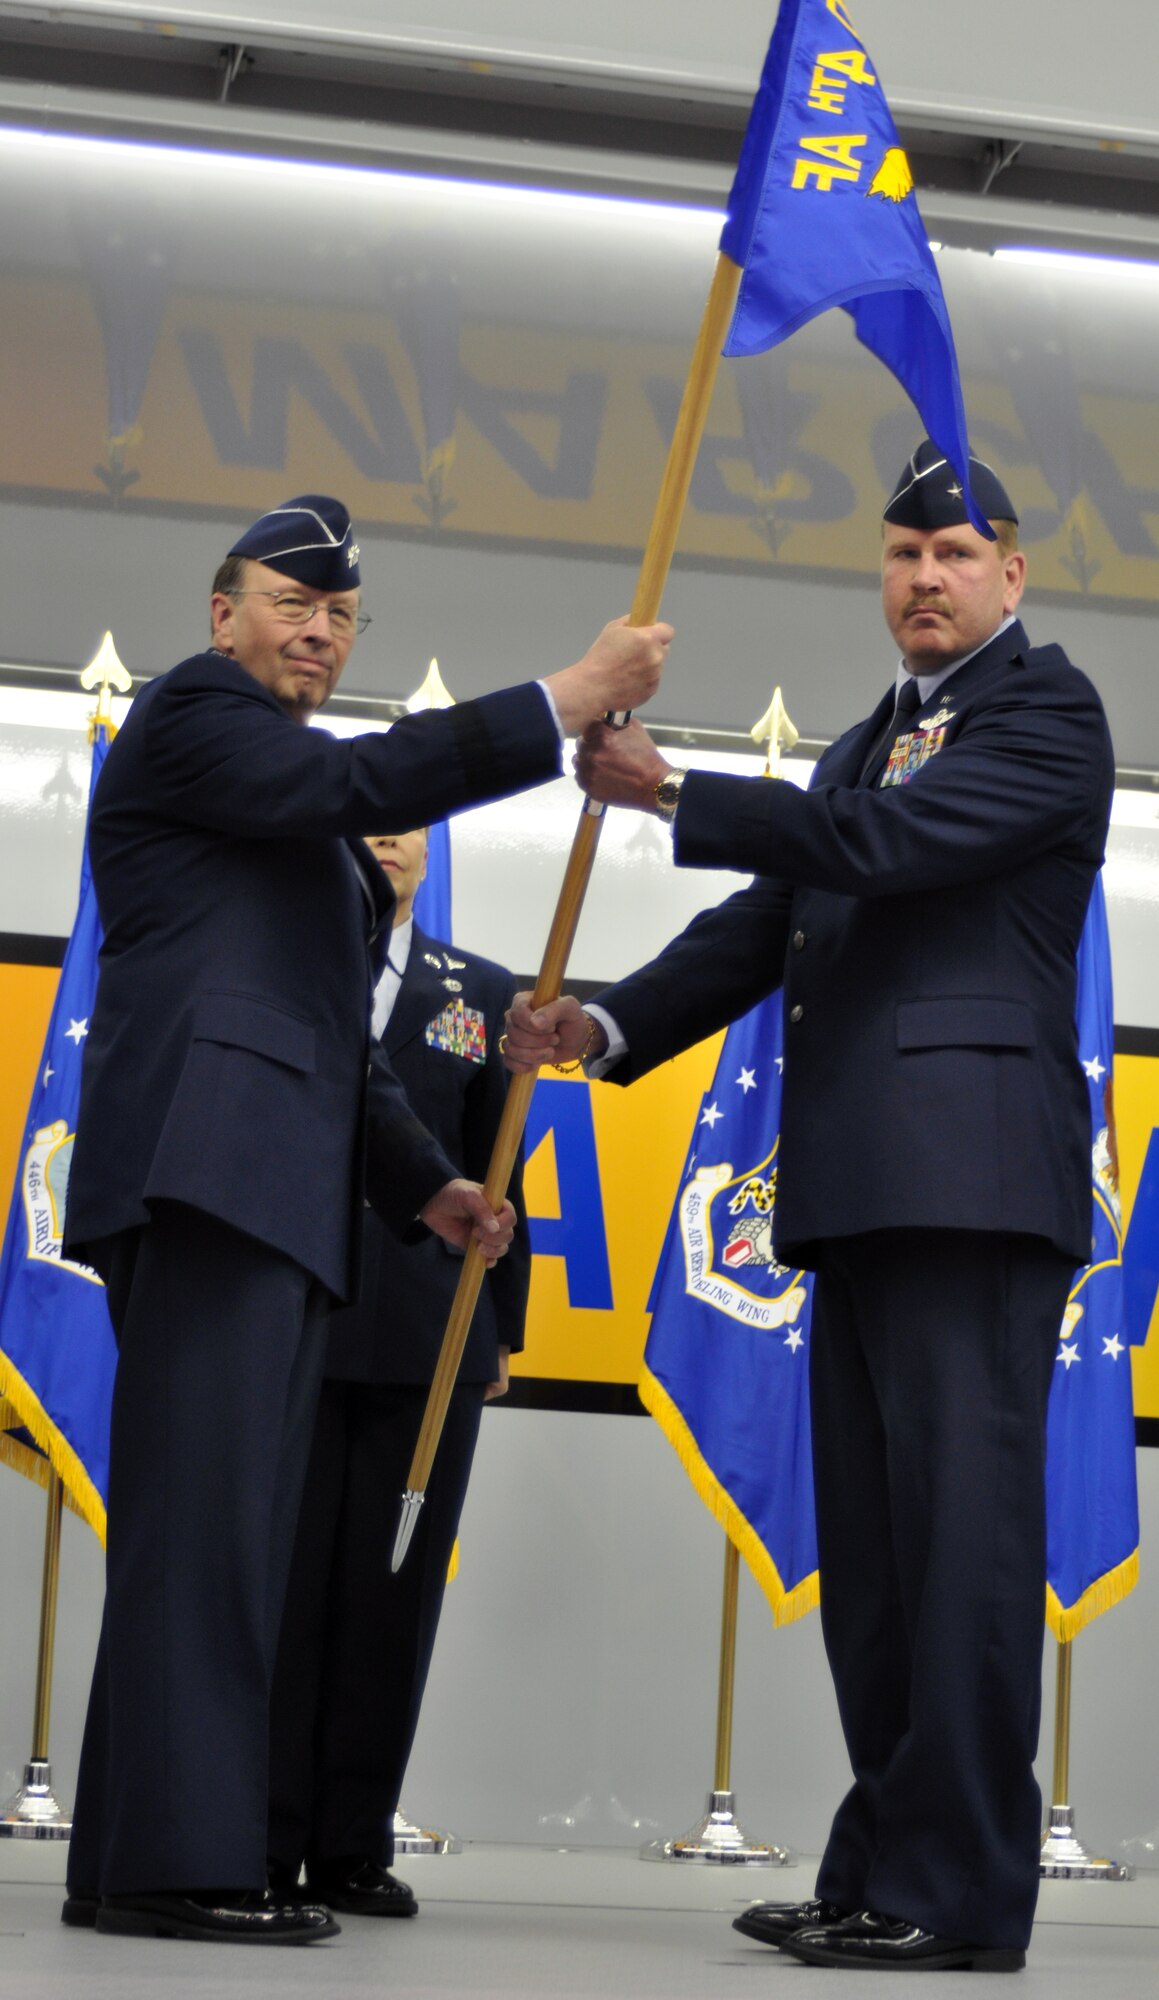 Brig. Gen. Mark A. Kyle accepts the 4th Air Force guidon from Lt. Gen. Charles E. Stenner, chief of Air Force Reserve, Headquarters, U.S. Air Force, Washington D.C., and commander, Air Force Reserve Command, Robins Air Force Base, Ga., during a change of command ceremony at March Air Reserve Base, Calif., March 12, 2011.  General Kyle is the new commander of 4th Air Force, taking the place of the former commander, Maj. Gen. Eric W. Crabtree. (U.S. Air Force photo/Master Sgt. Linda Welz)